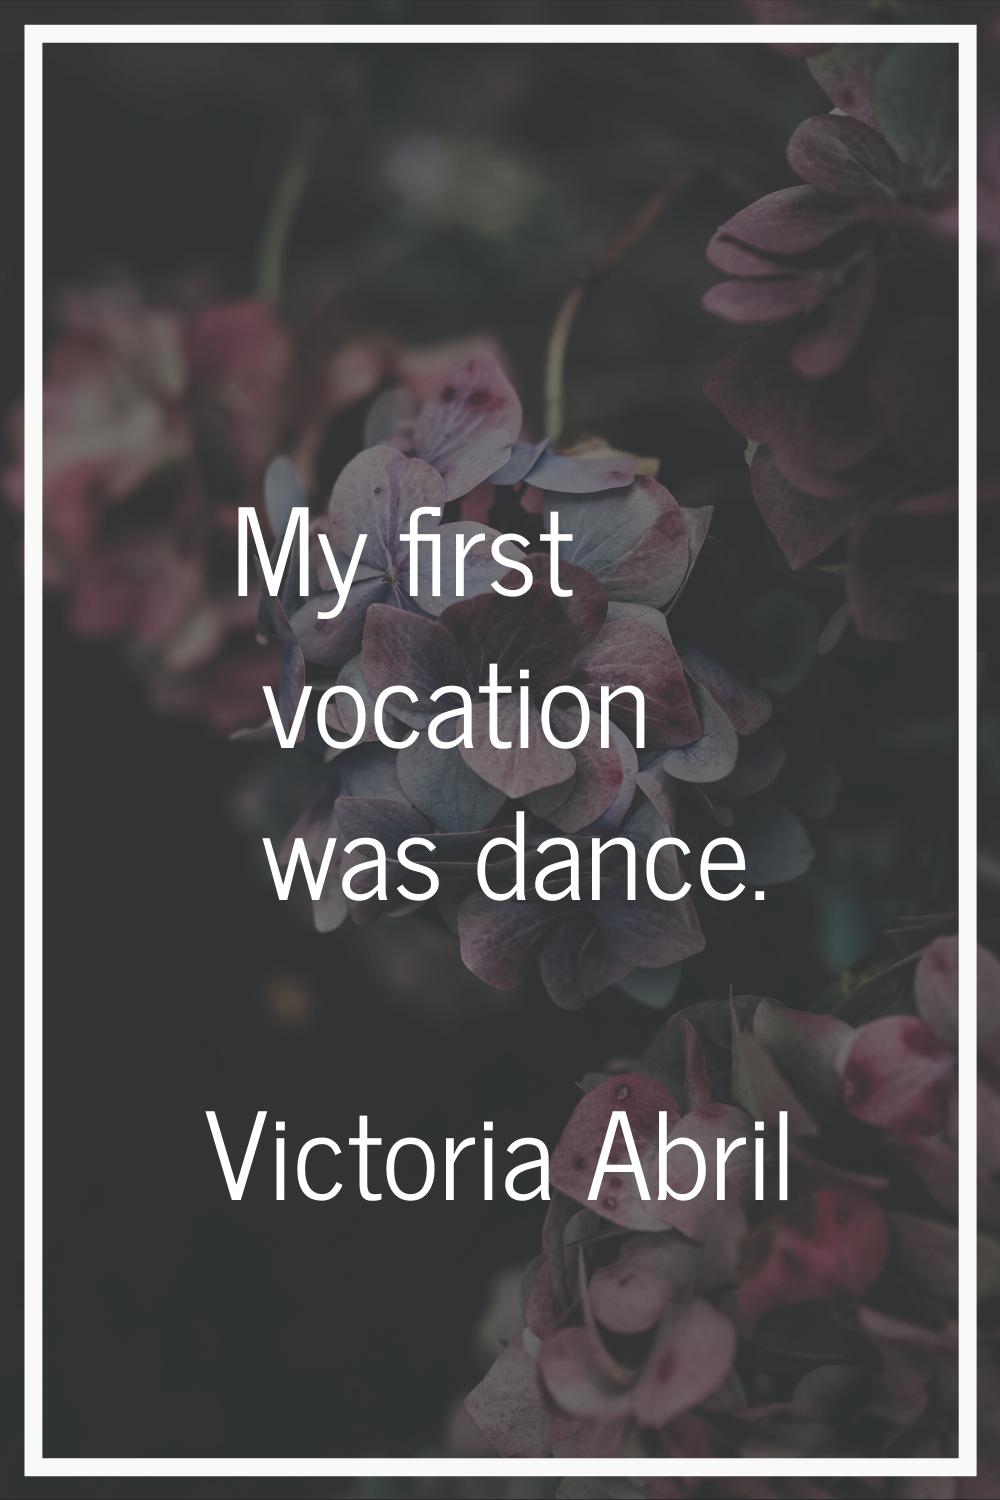 My first vocation was dance.